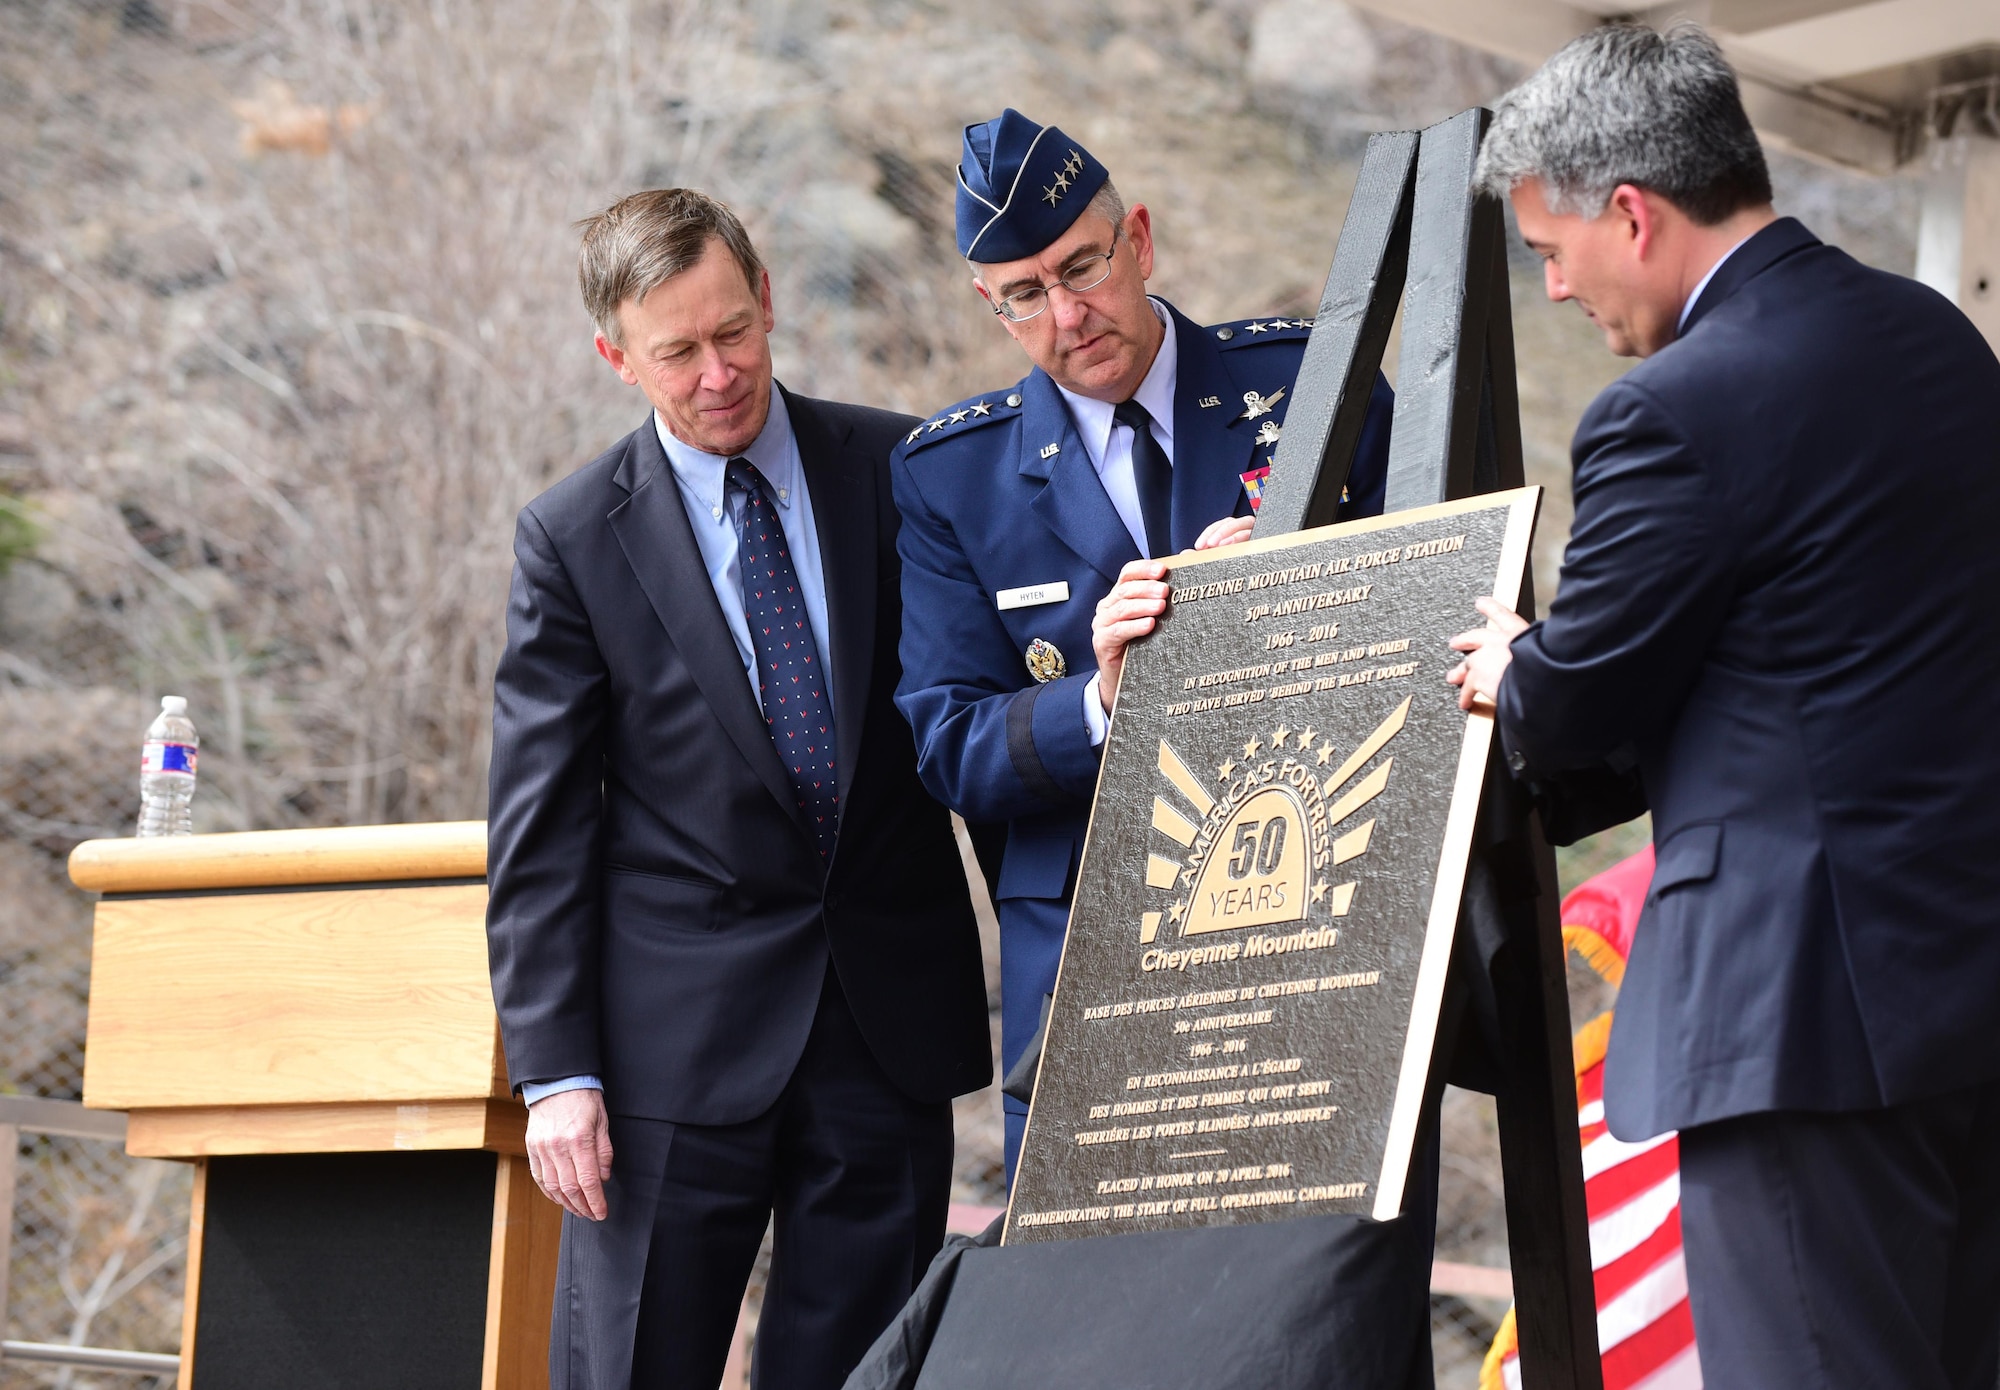 Colorado Gov. John Hickenlooper, Gen. John Hyten, the Air Force Space Command commander, and Colorado Sen. Cory Gardner unveil the 50th anniversary rededication ceremony plaque at Cheyenne Mountain Air Force Station, Colo., April 15, 2016. With the nickname "America's Fortress," Cheyenne Mountain AFS is situated beneath 2,000 feet of granite and consists of 15 buildings resting on more than 1,300 enormous steel springs. Cheyenne Mountain AFS is owned by the 21st Space Wing at Peterson Air Force Base, Colo., and operated by the 721st Mission Support Group. (U.S. Air Force photo/Staff Sgt. Amber Grimm) 